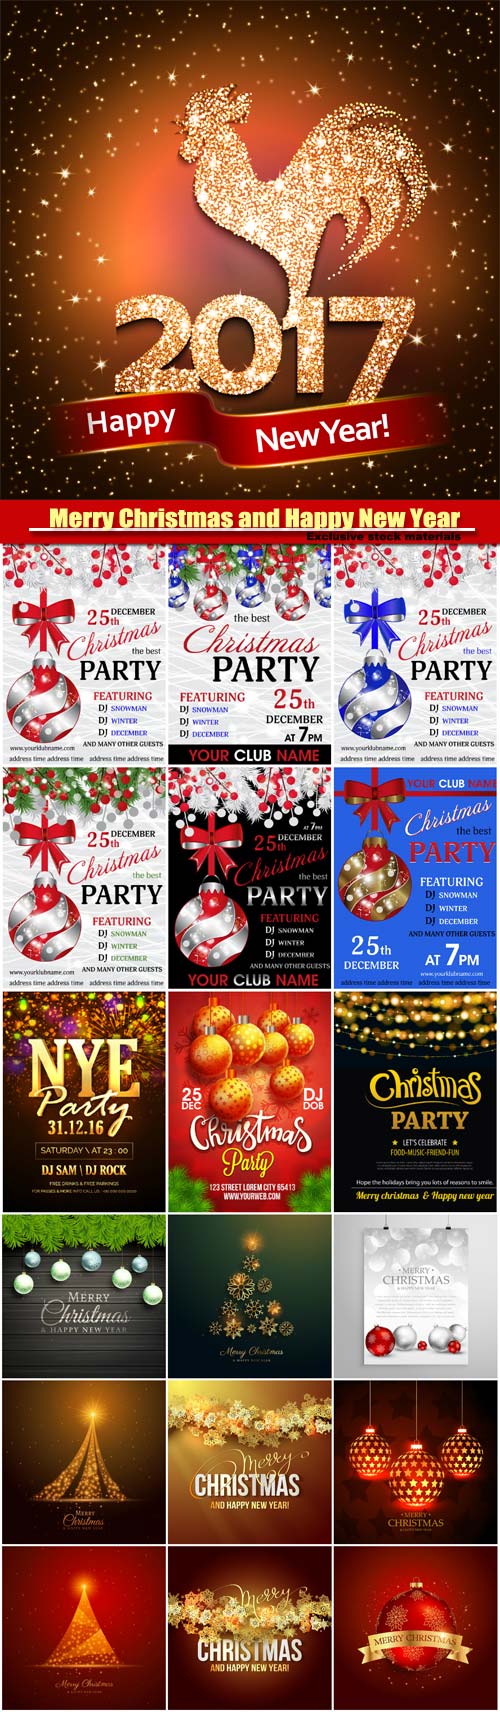 Christmas party vector invitation, Merry Christmas and Happy New Year